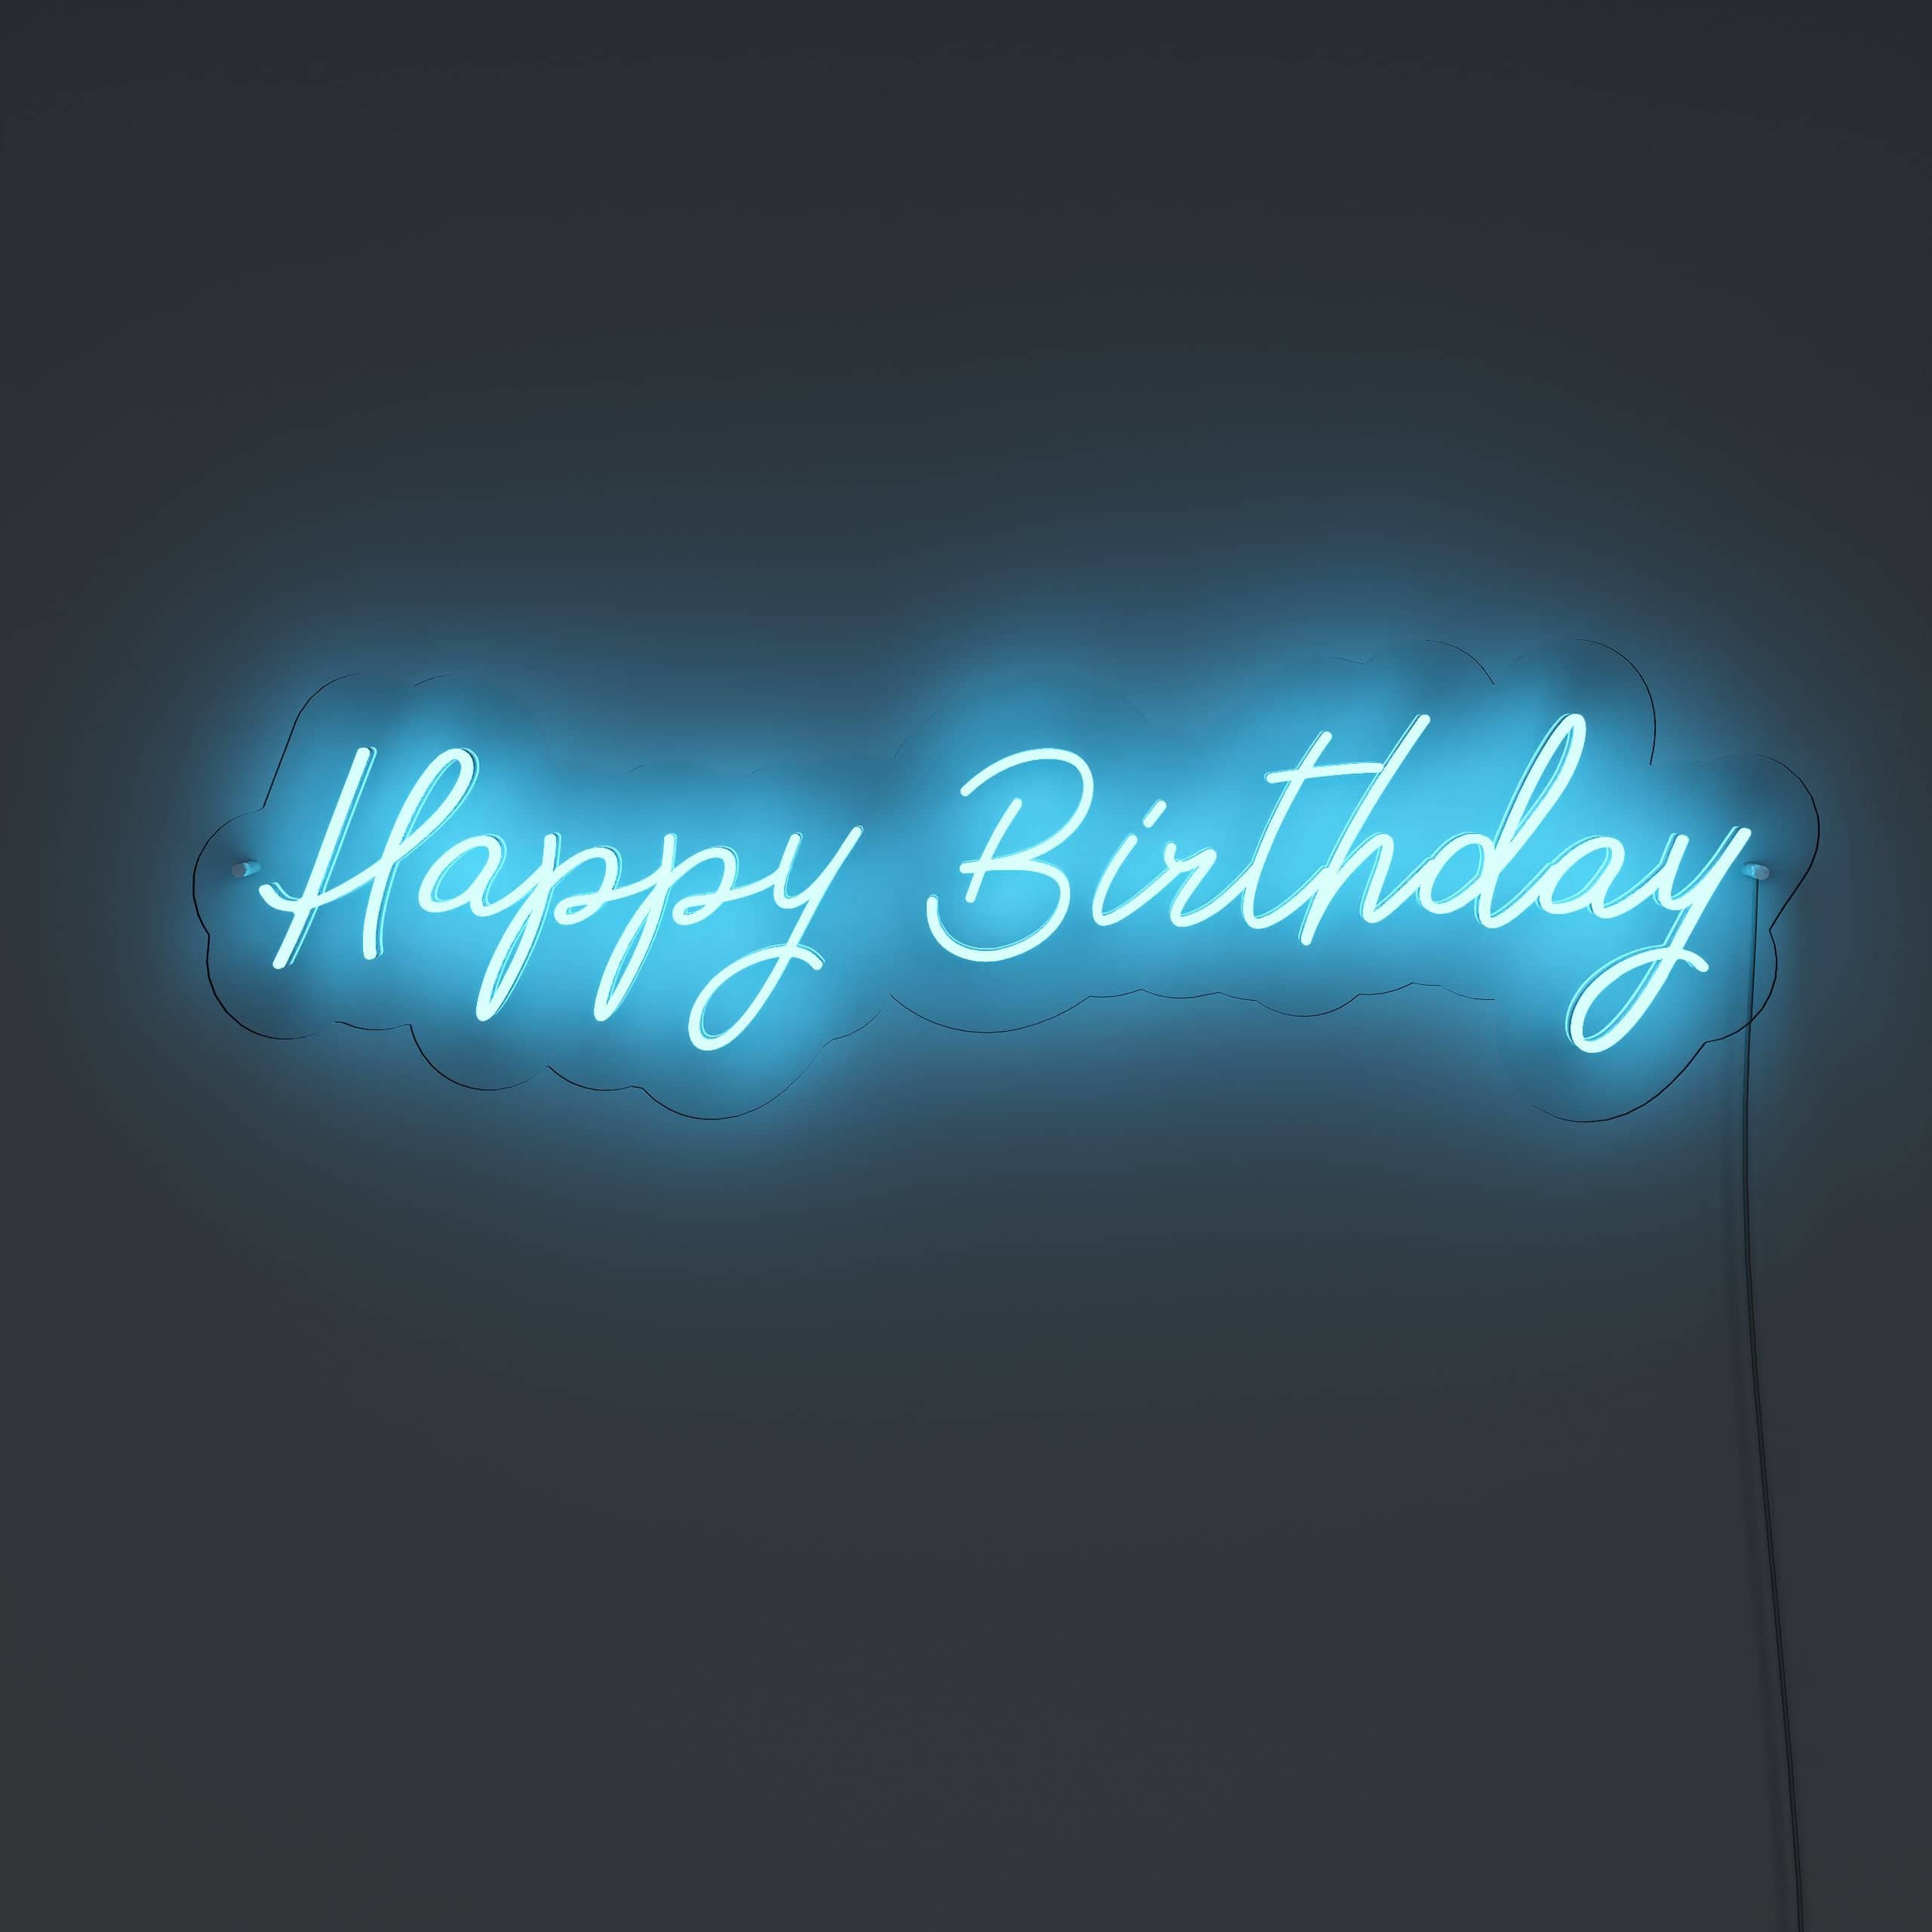 celebrate-with-a-vibrant-neon-sign!-neon-sign-lite